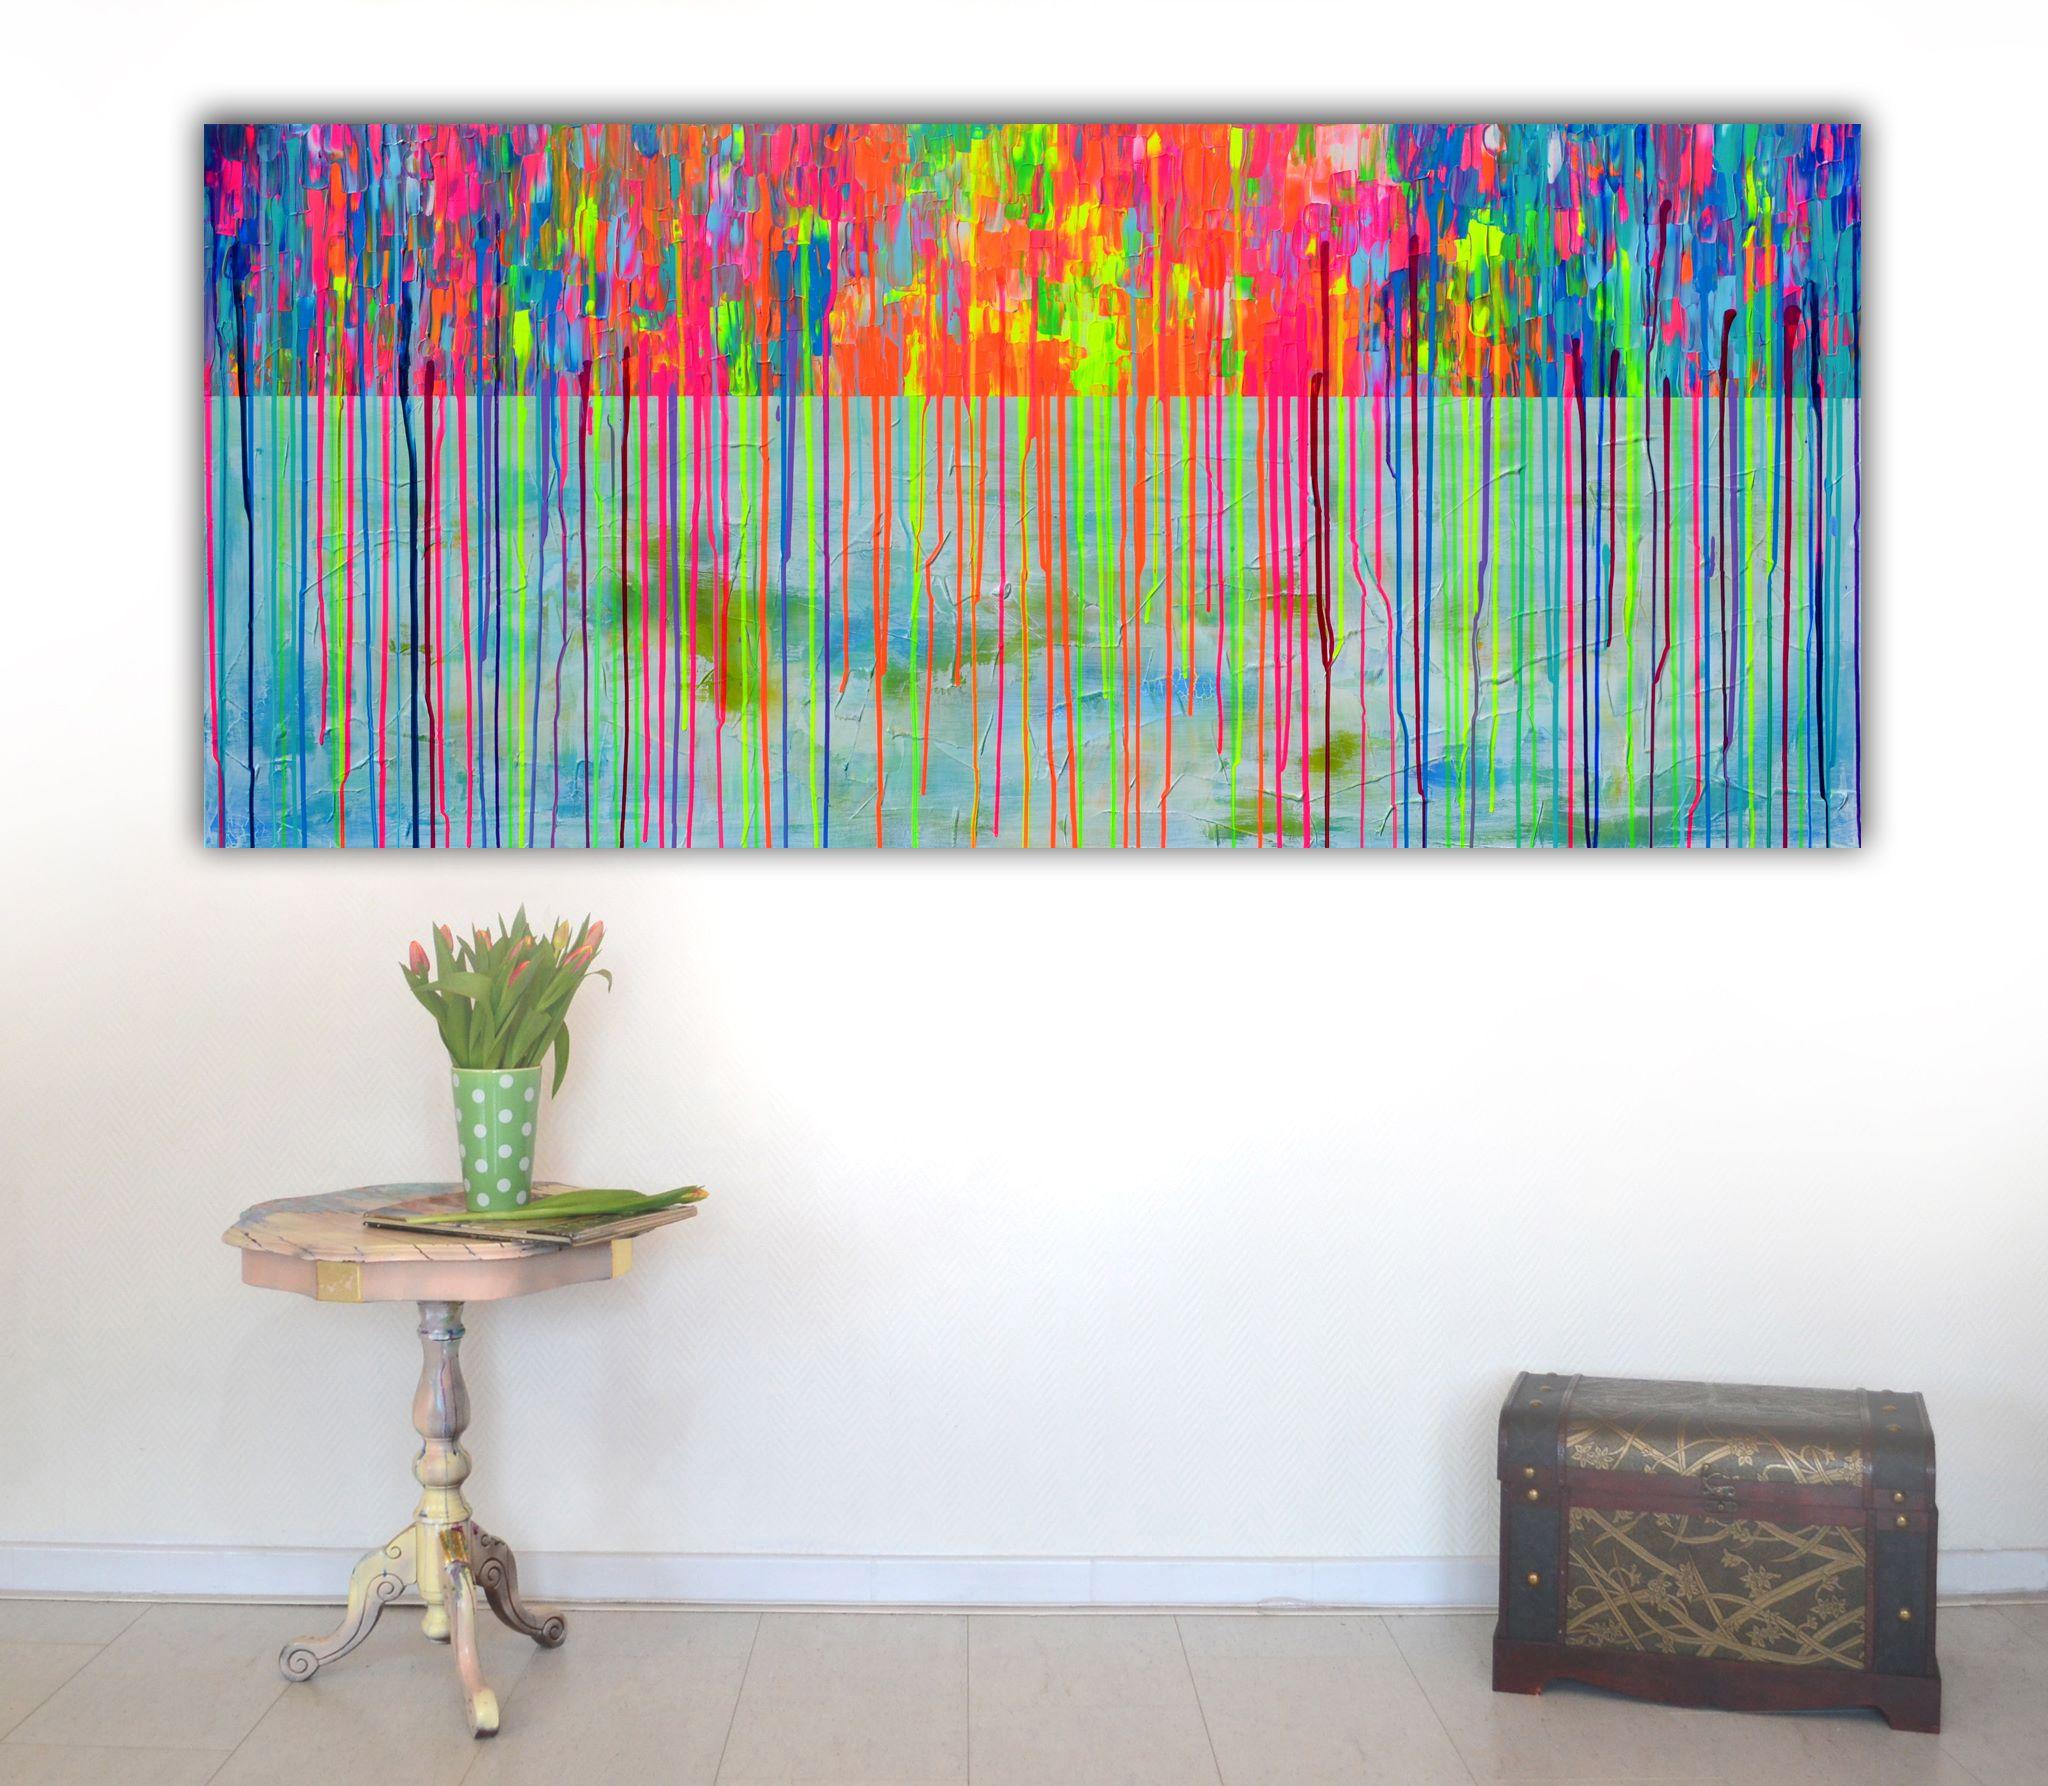 READY TO HANG - GALLERY QUALITY - FREE SHIPPING - with the edges painted.  A very beautiful colourful textured large abstract painting combined with very calm and peaceful rusty area, the focal point of your main room.  You can see some examples of